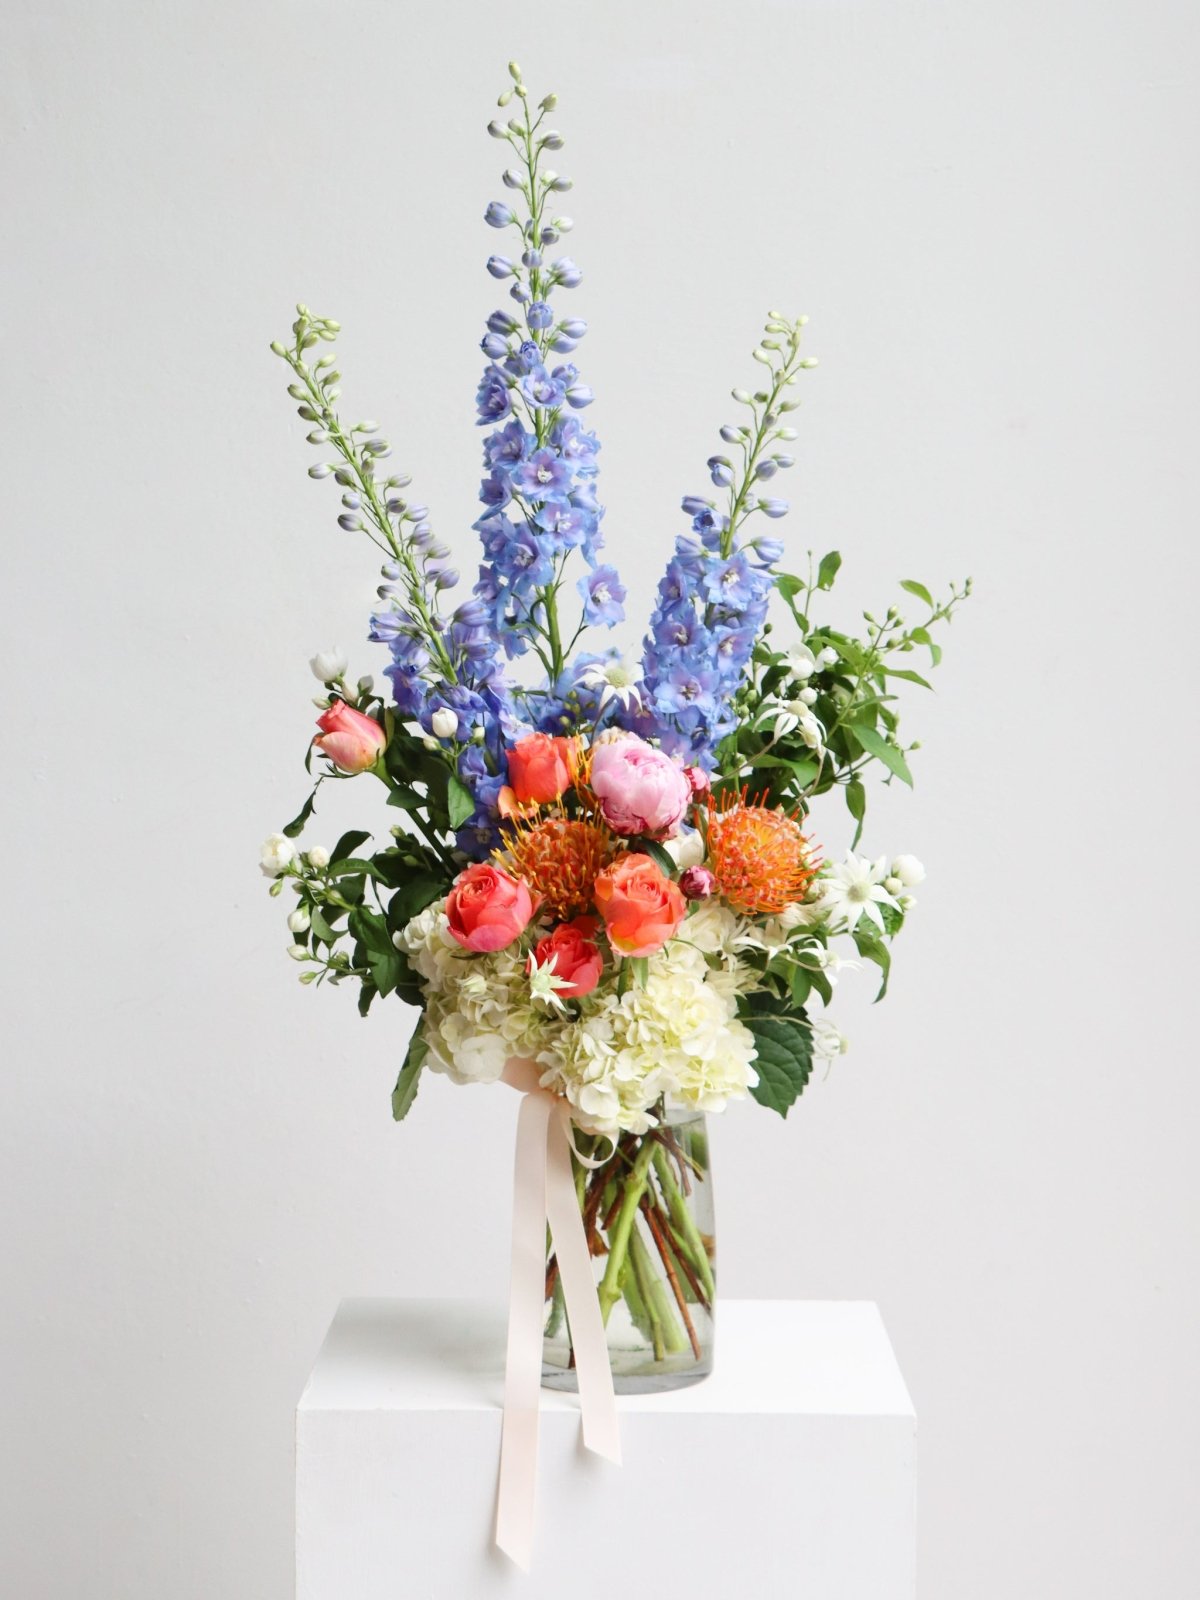 A large seasonal arrangment in a glass vase. The arrangement in this image features Pincushions, Roses, Hydrangea, Flannel Flowers, Delphinium, Peonies and Mock Orange. 